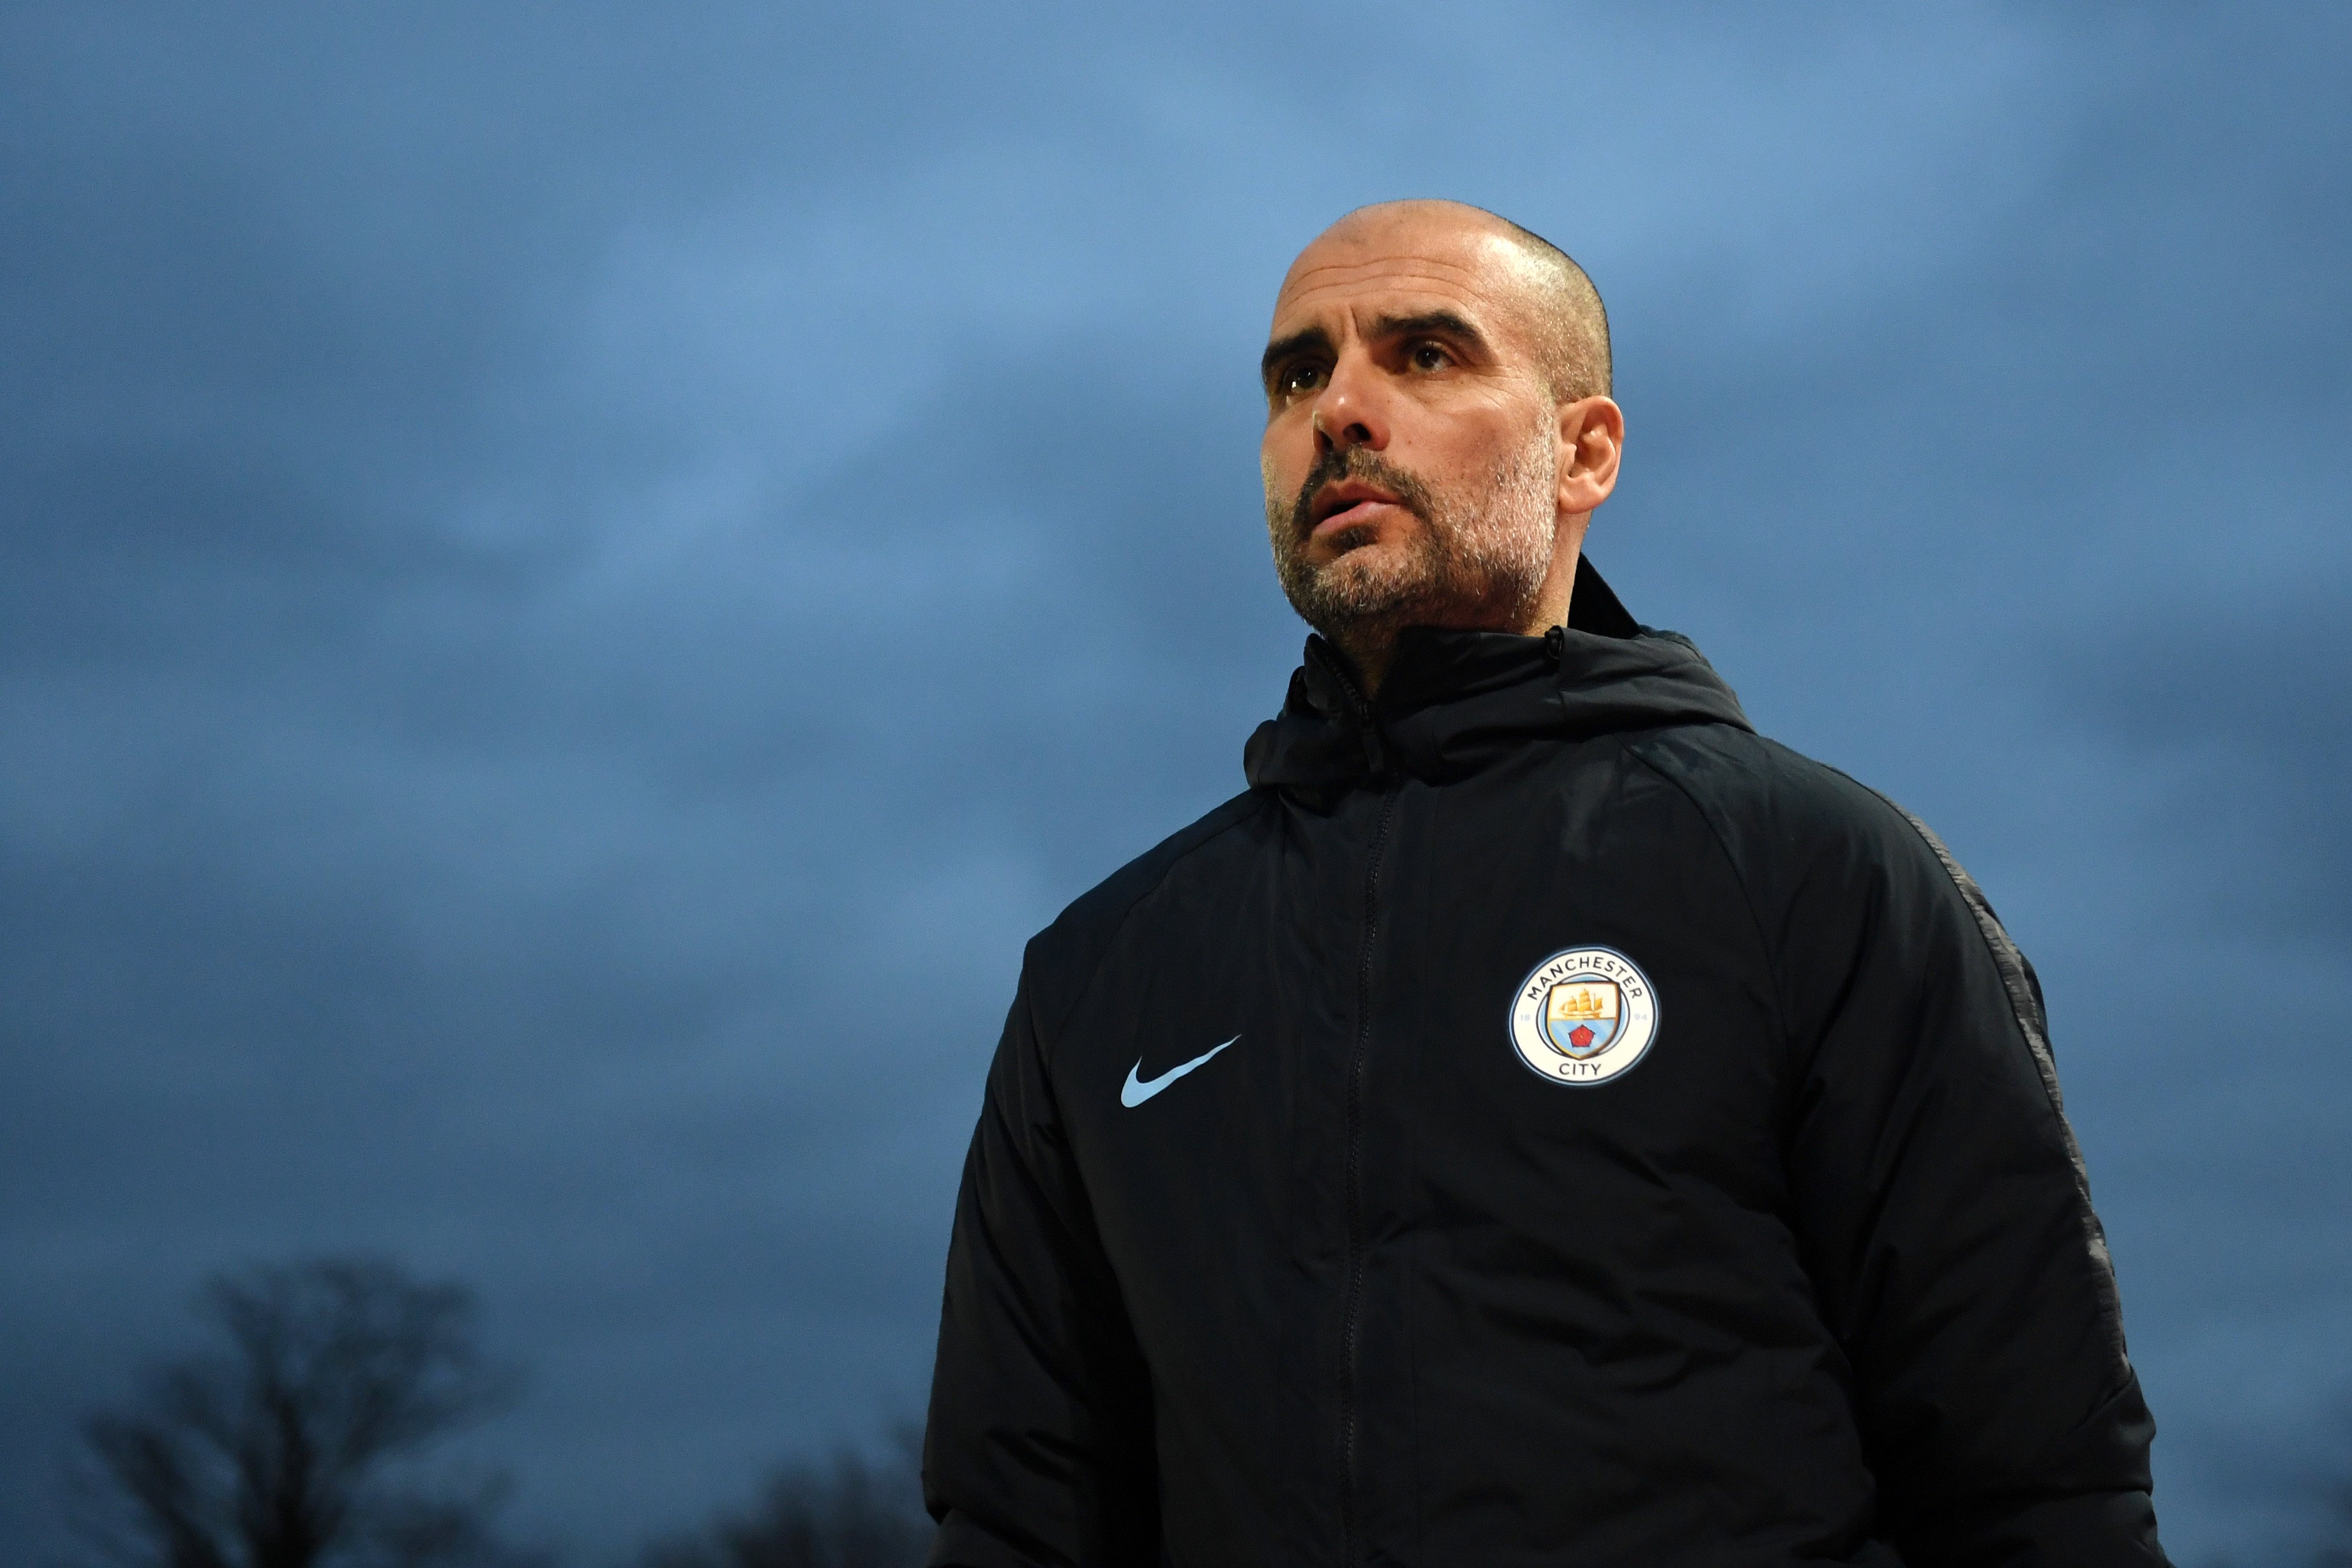 Pep Guardiola reveals why Man City cannot win the Champions League